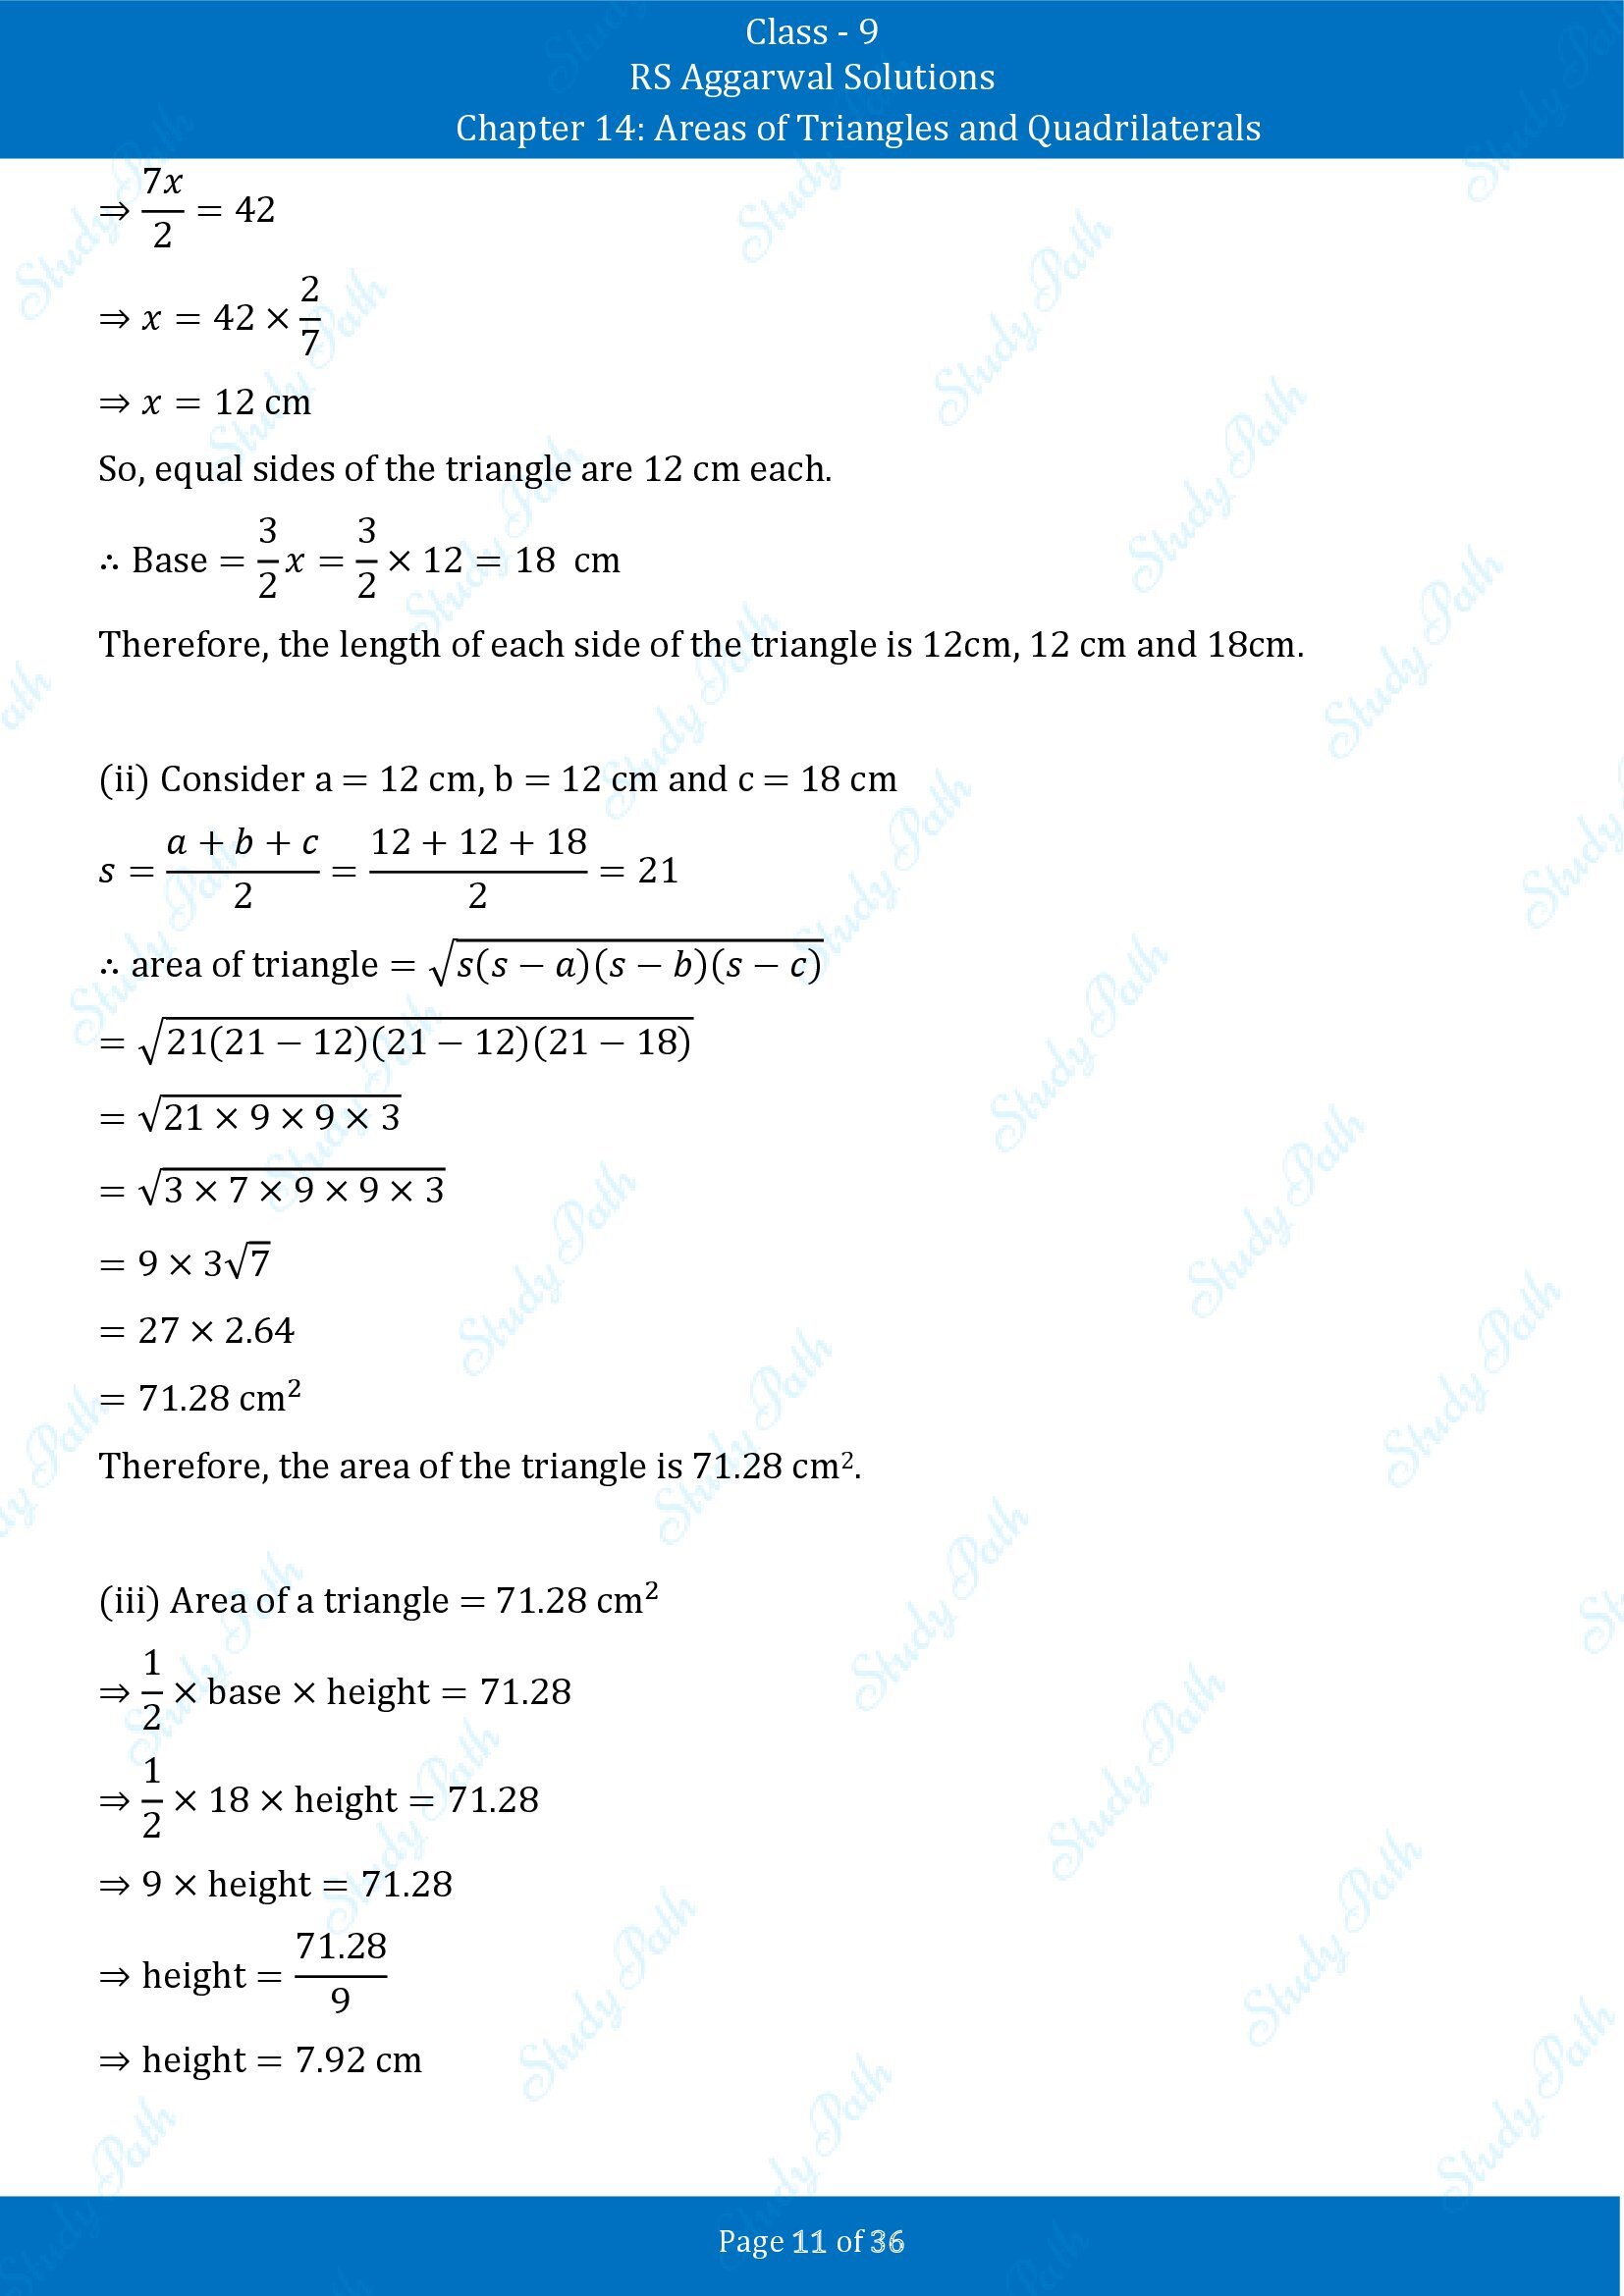 RS Aggarwal Solutions Class 9 Chapter 14 Areas of Triangles and Quadrilaterals Exercise 14 00011